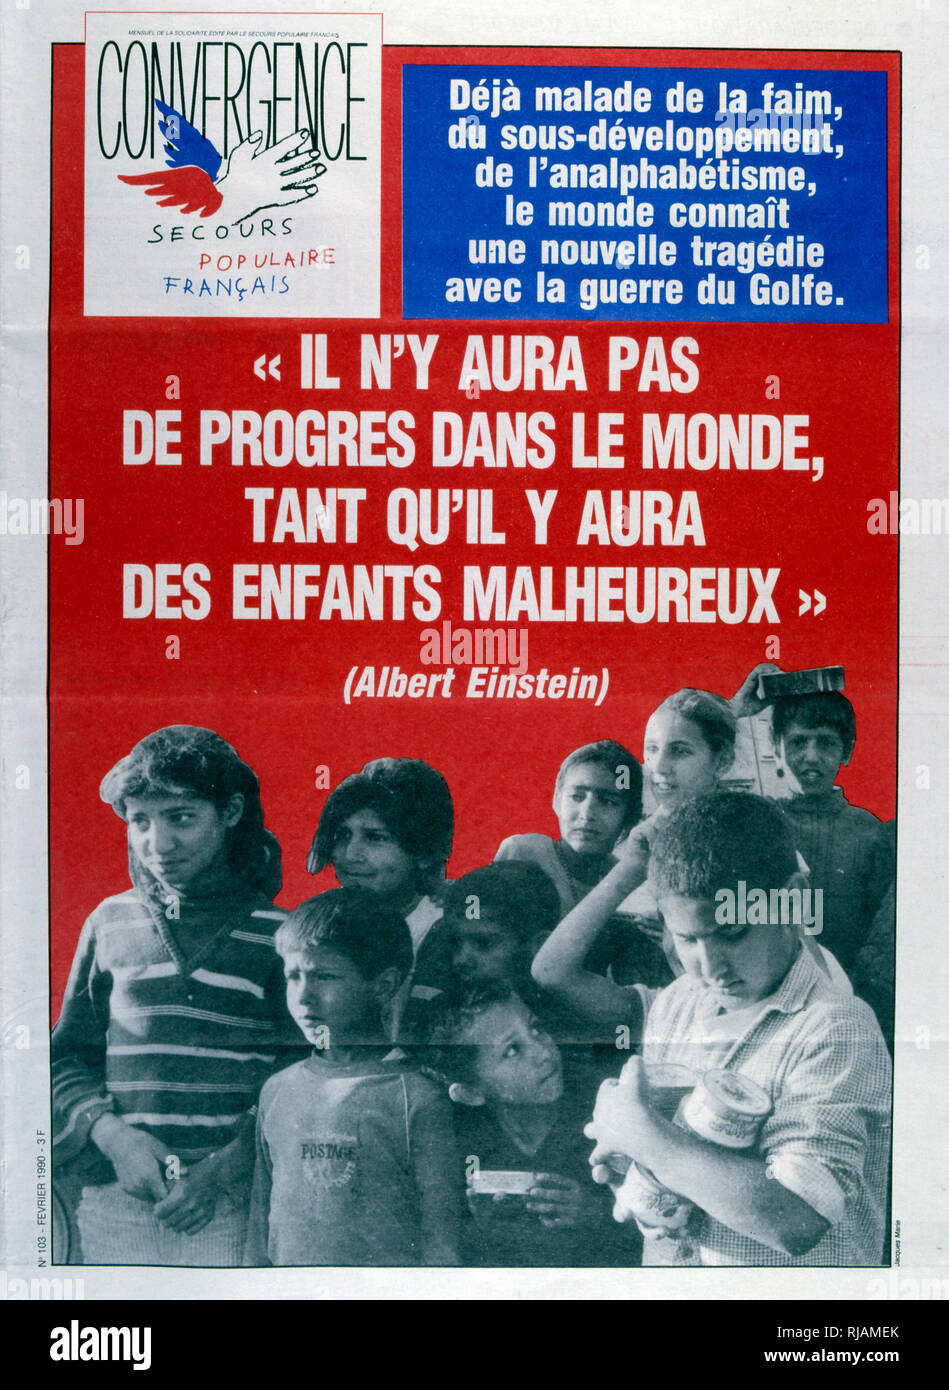 Report on the on the suffering of children as a result of the on-going Gulf War 1991 Front page of the French publication 'Convertgencen'  February 1991. The Gulf War (2 August 1990 - 28 February 1991), codenamed Operation Desert Shield and Operation Desert Storm, was a war waged by coalition forces from 35 nations led by the United States against Iraq in response to Iraq's invasion and annexation of Kuwait. Stock Photo